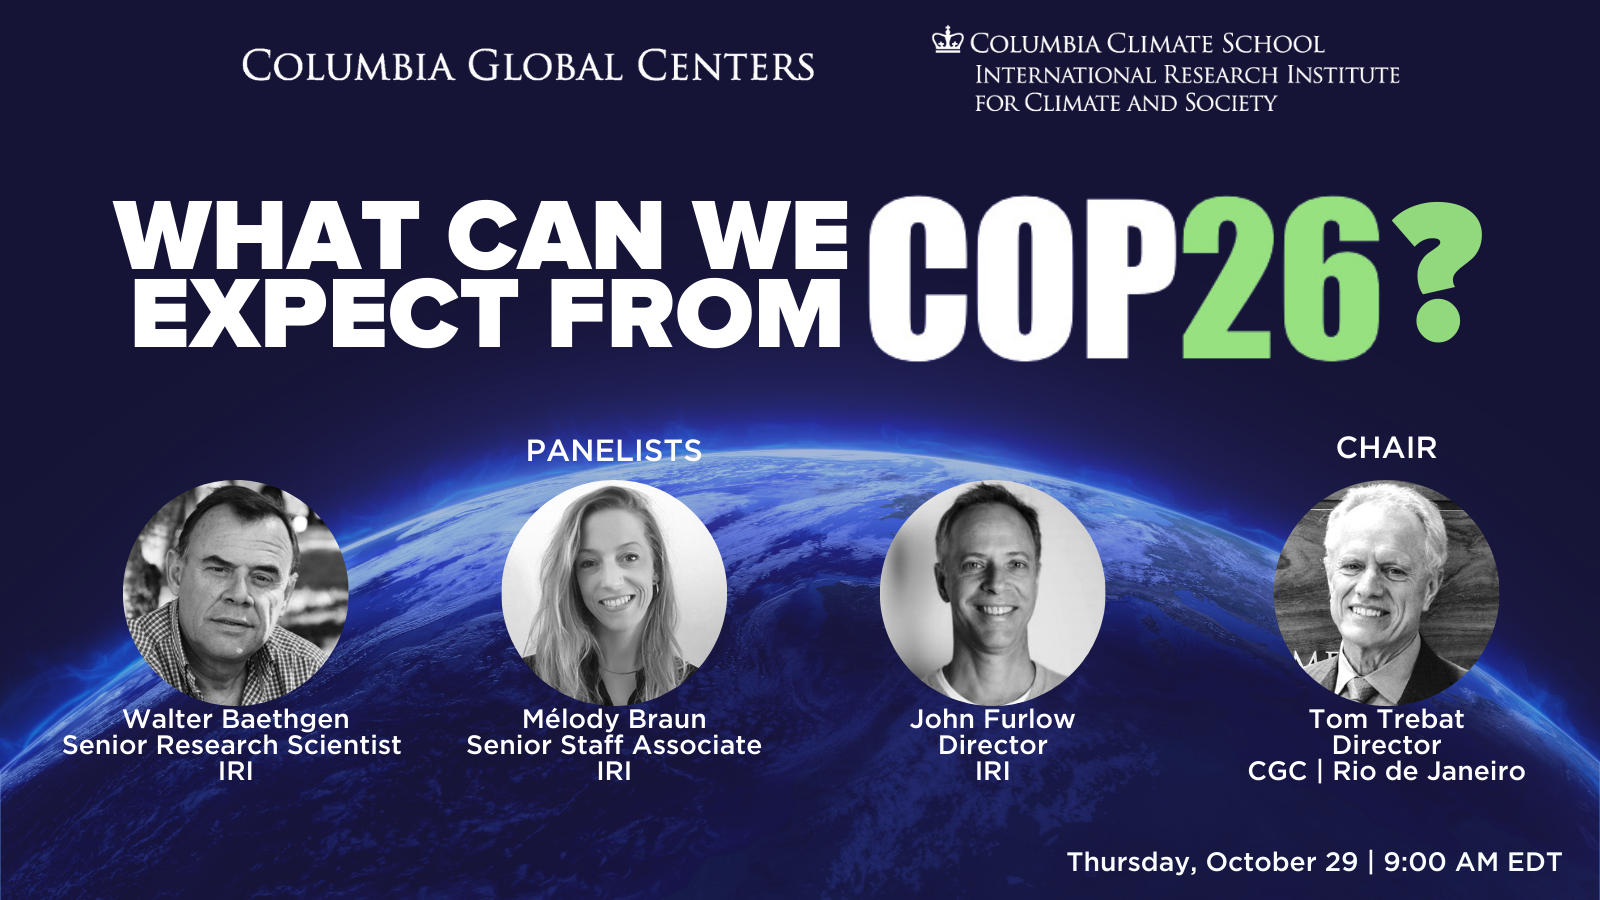 What can we expect from COP26?